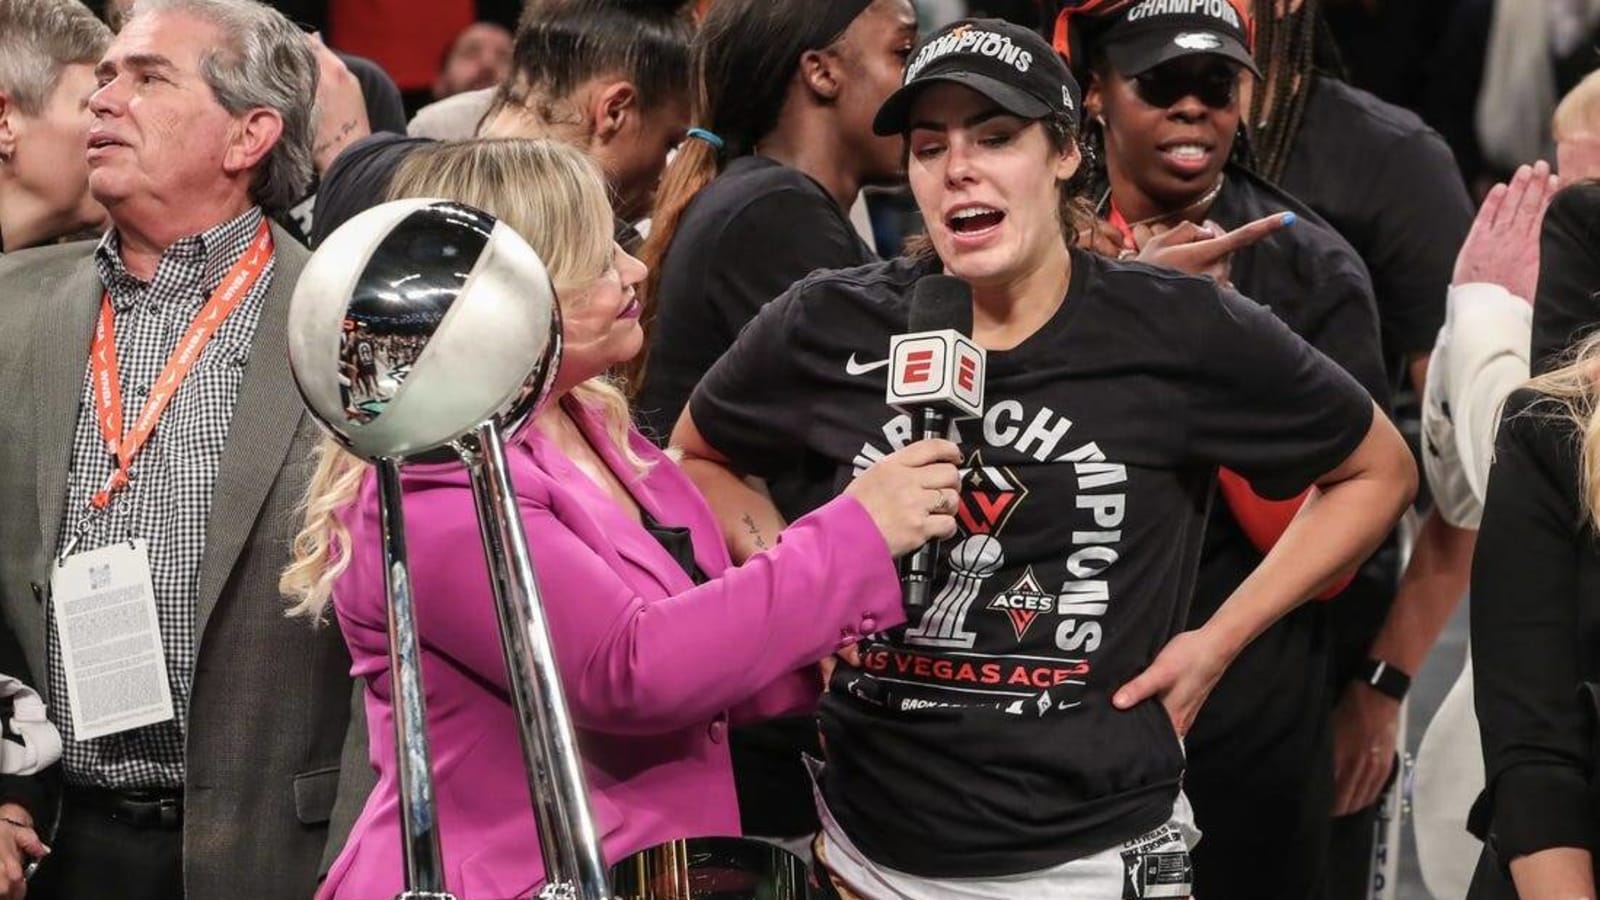 WNBA Finals TV audience hits 20-year high